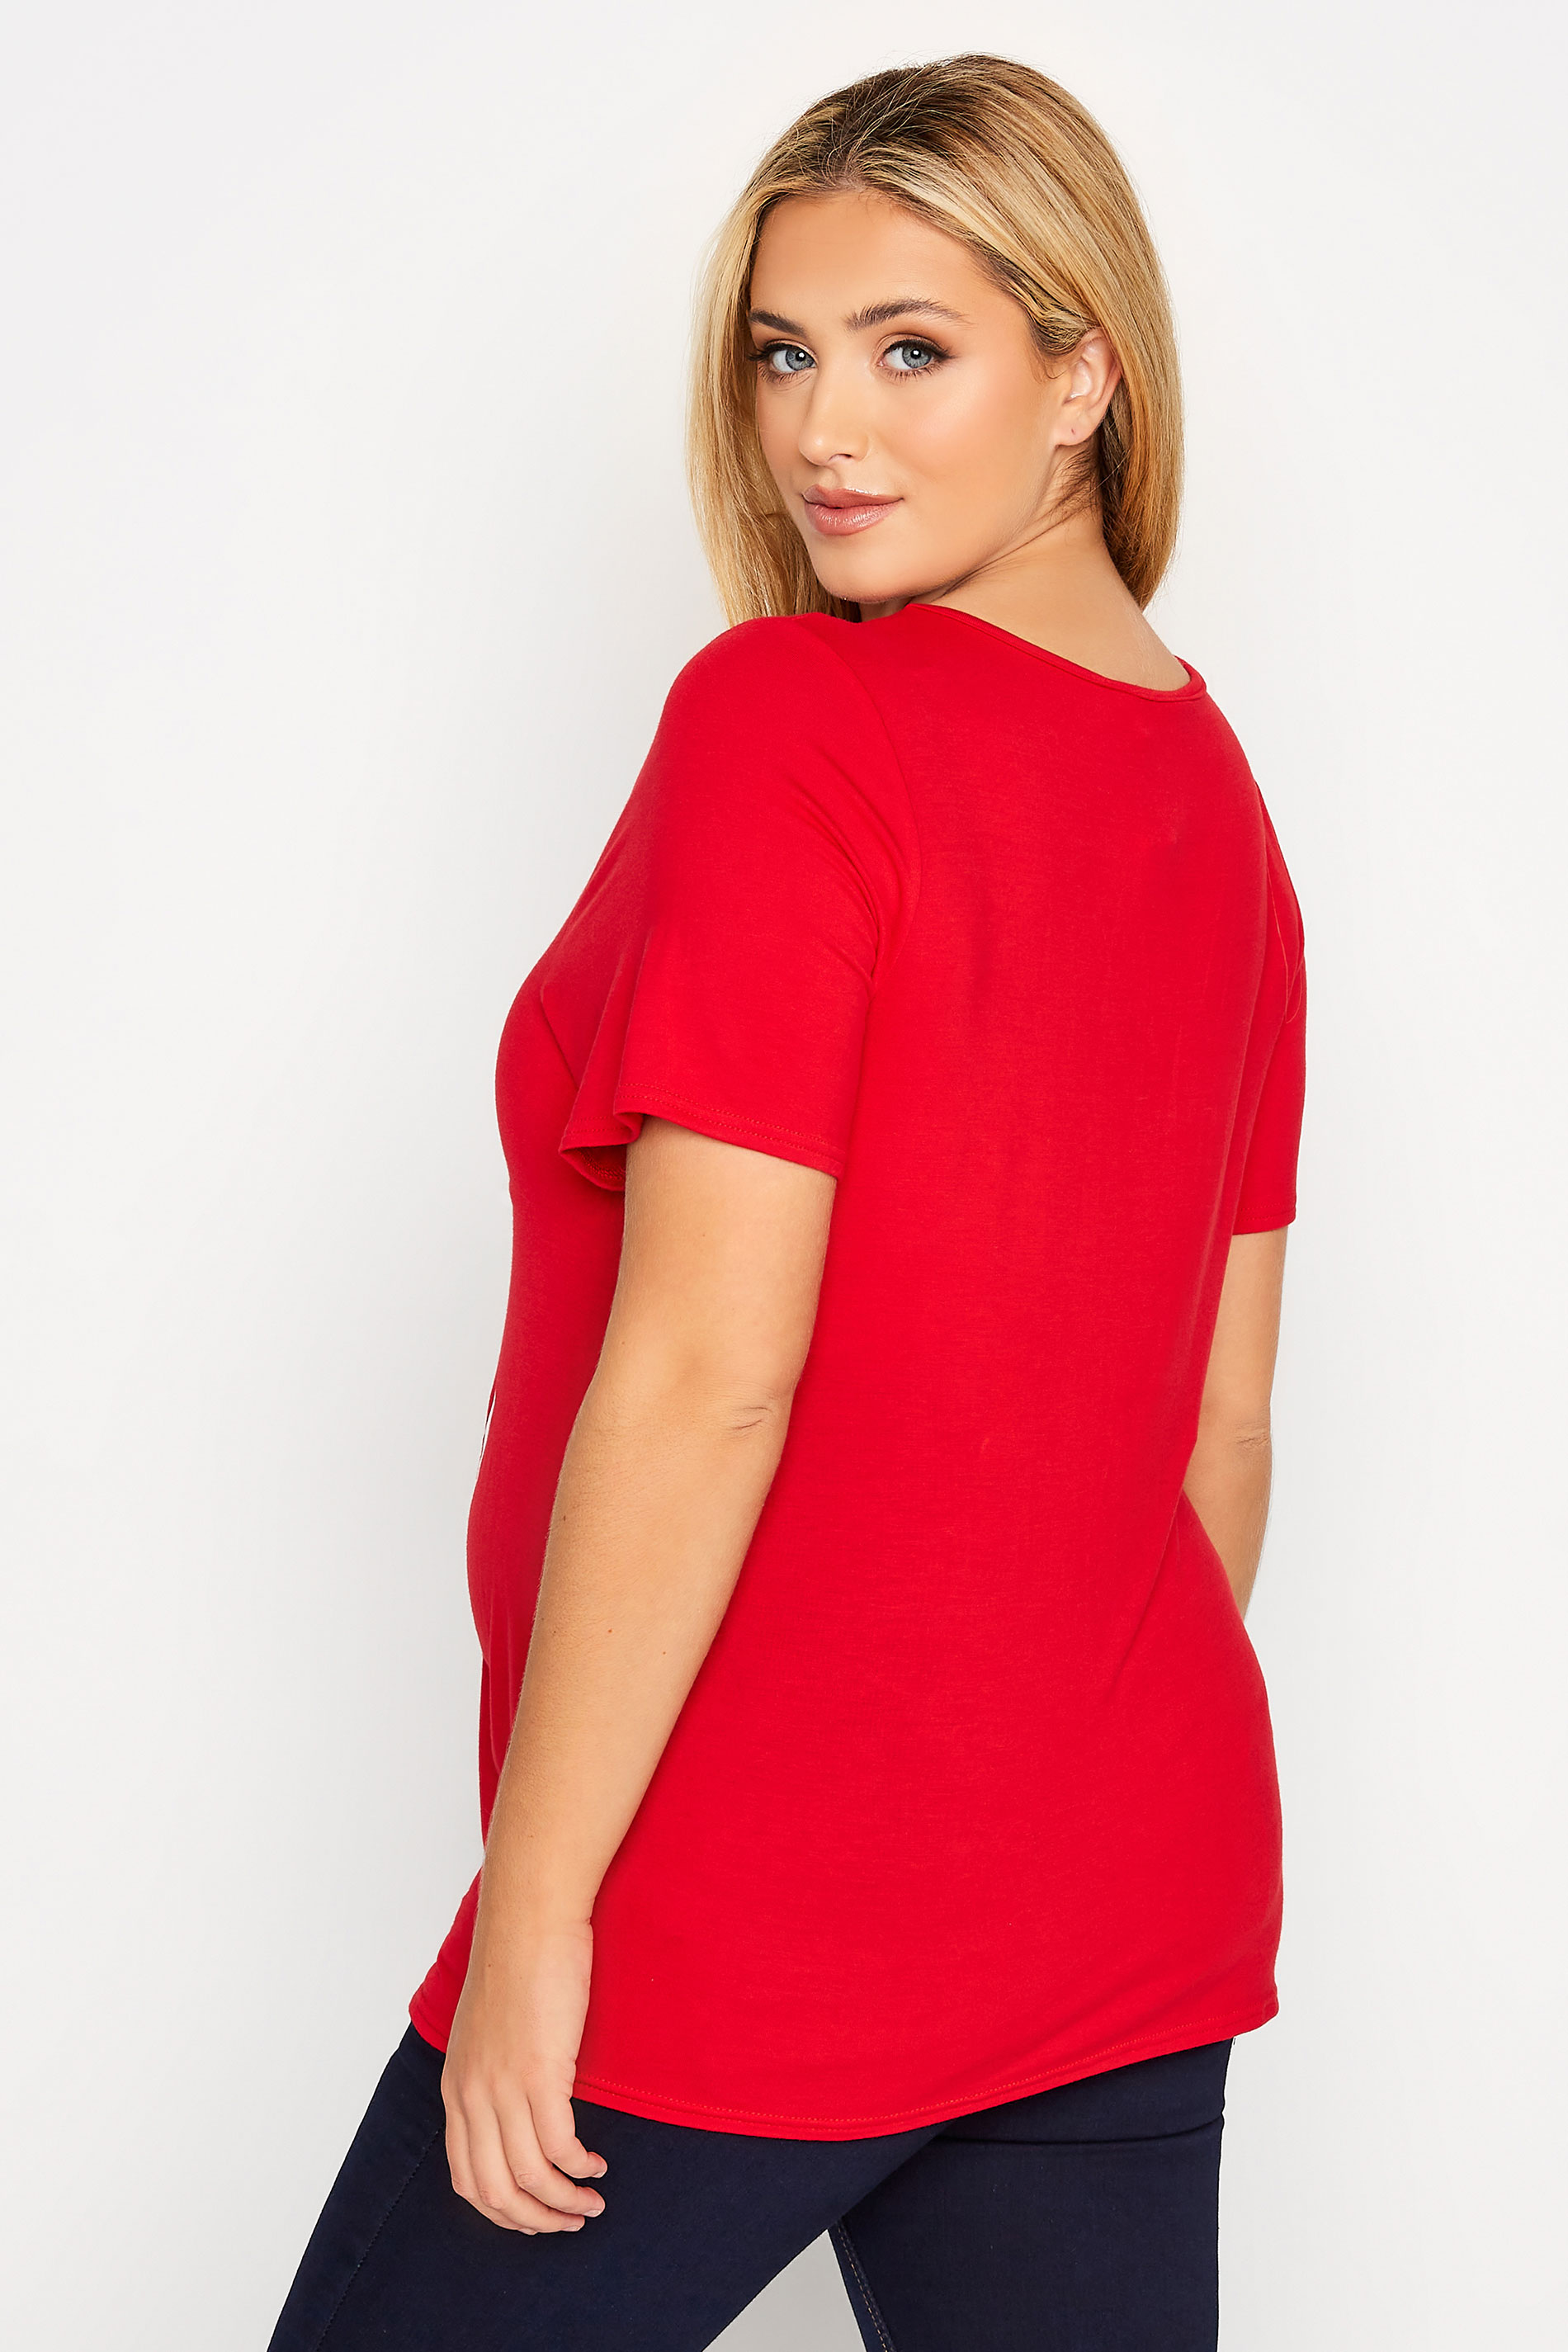 BUMP IT UP MATERNITY Plus Size Red 'Santa Baby' Christmas Top | Yours Clothing 3